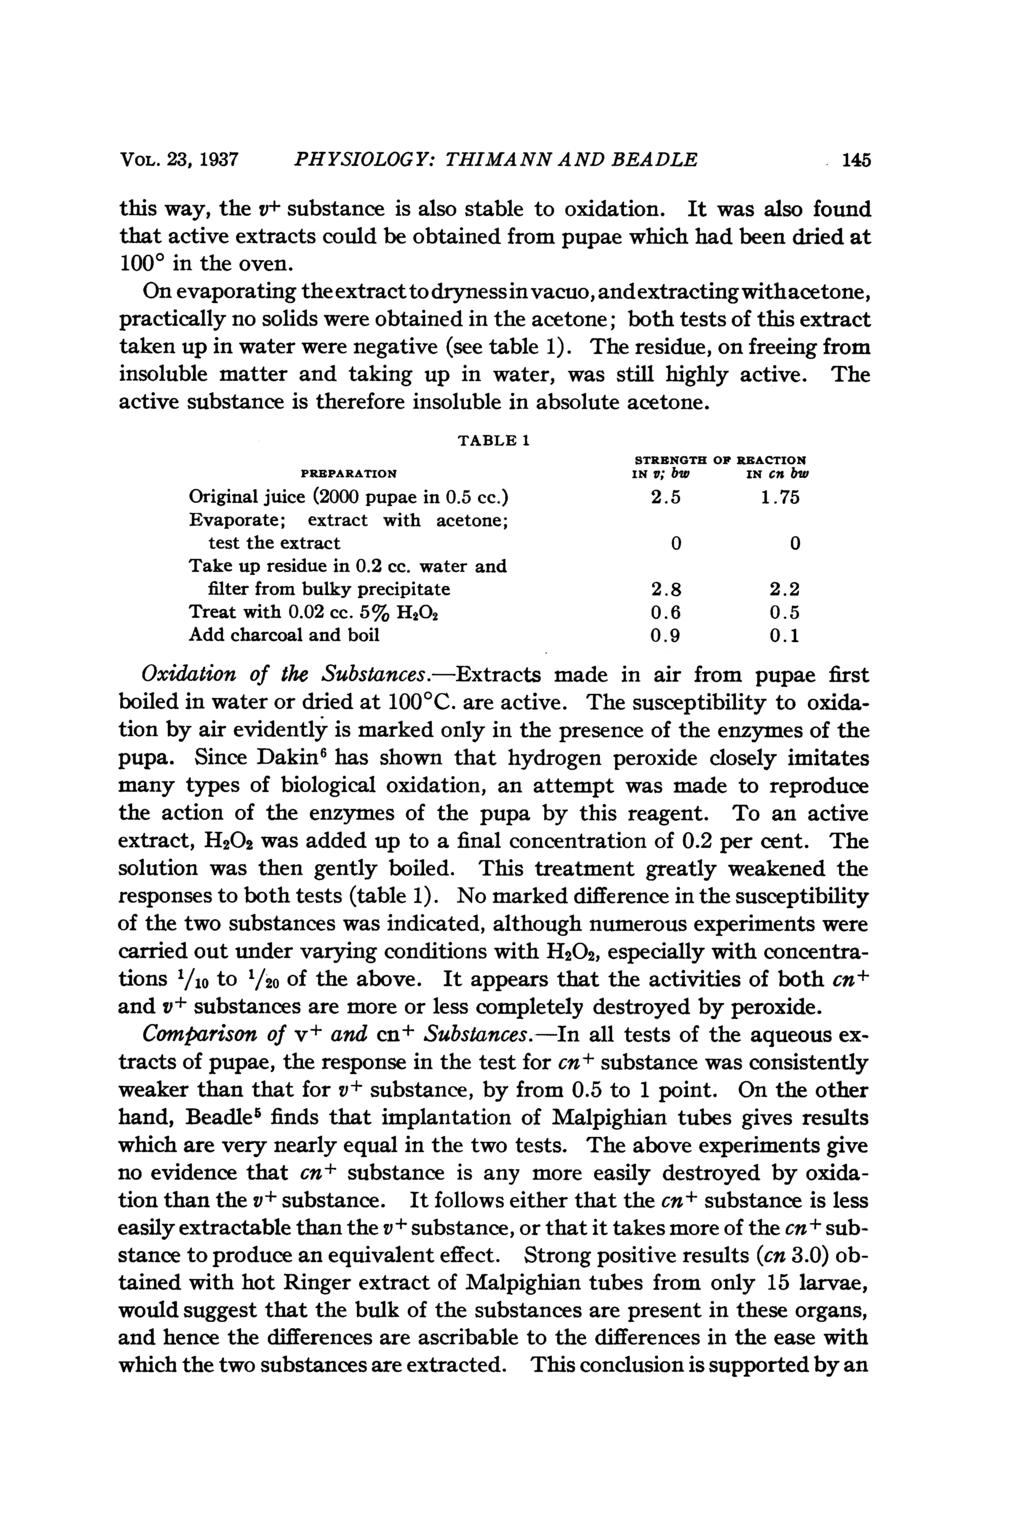 VOL. 23, 1937 PHYSIOLOG Y: THIMA NN A ND BEADLE 145 this way, the v+ substance is also stable to oxidation.